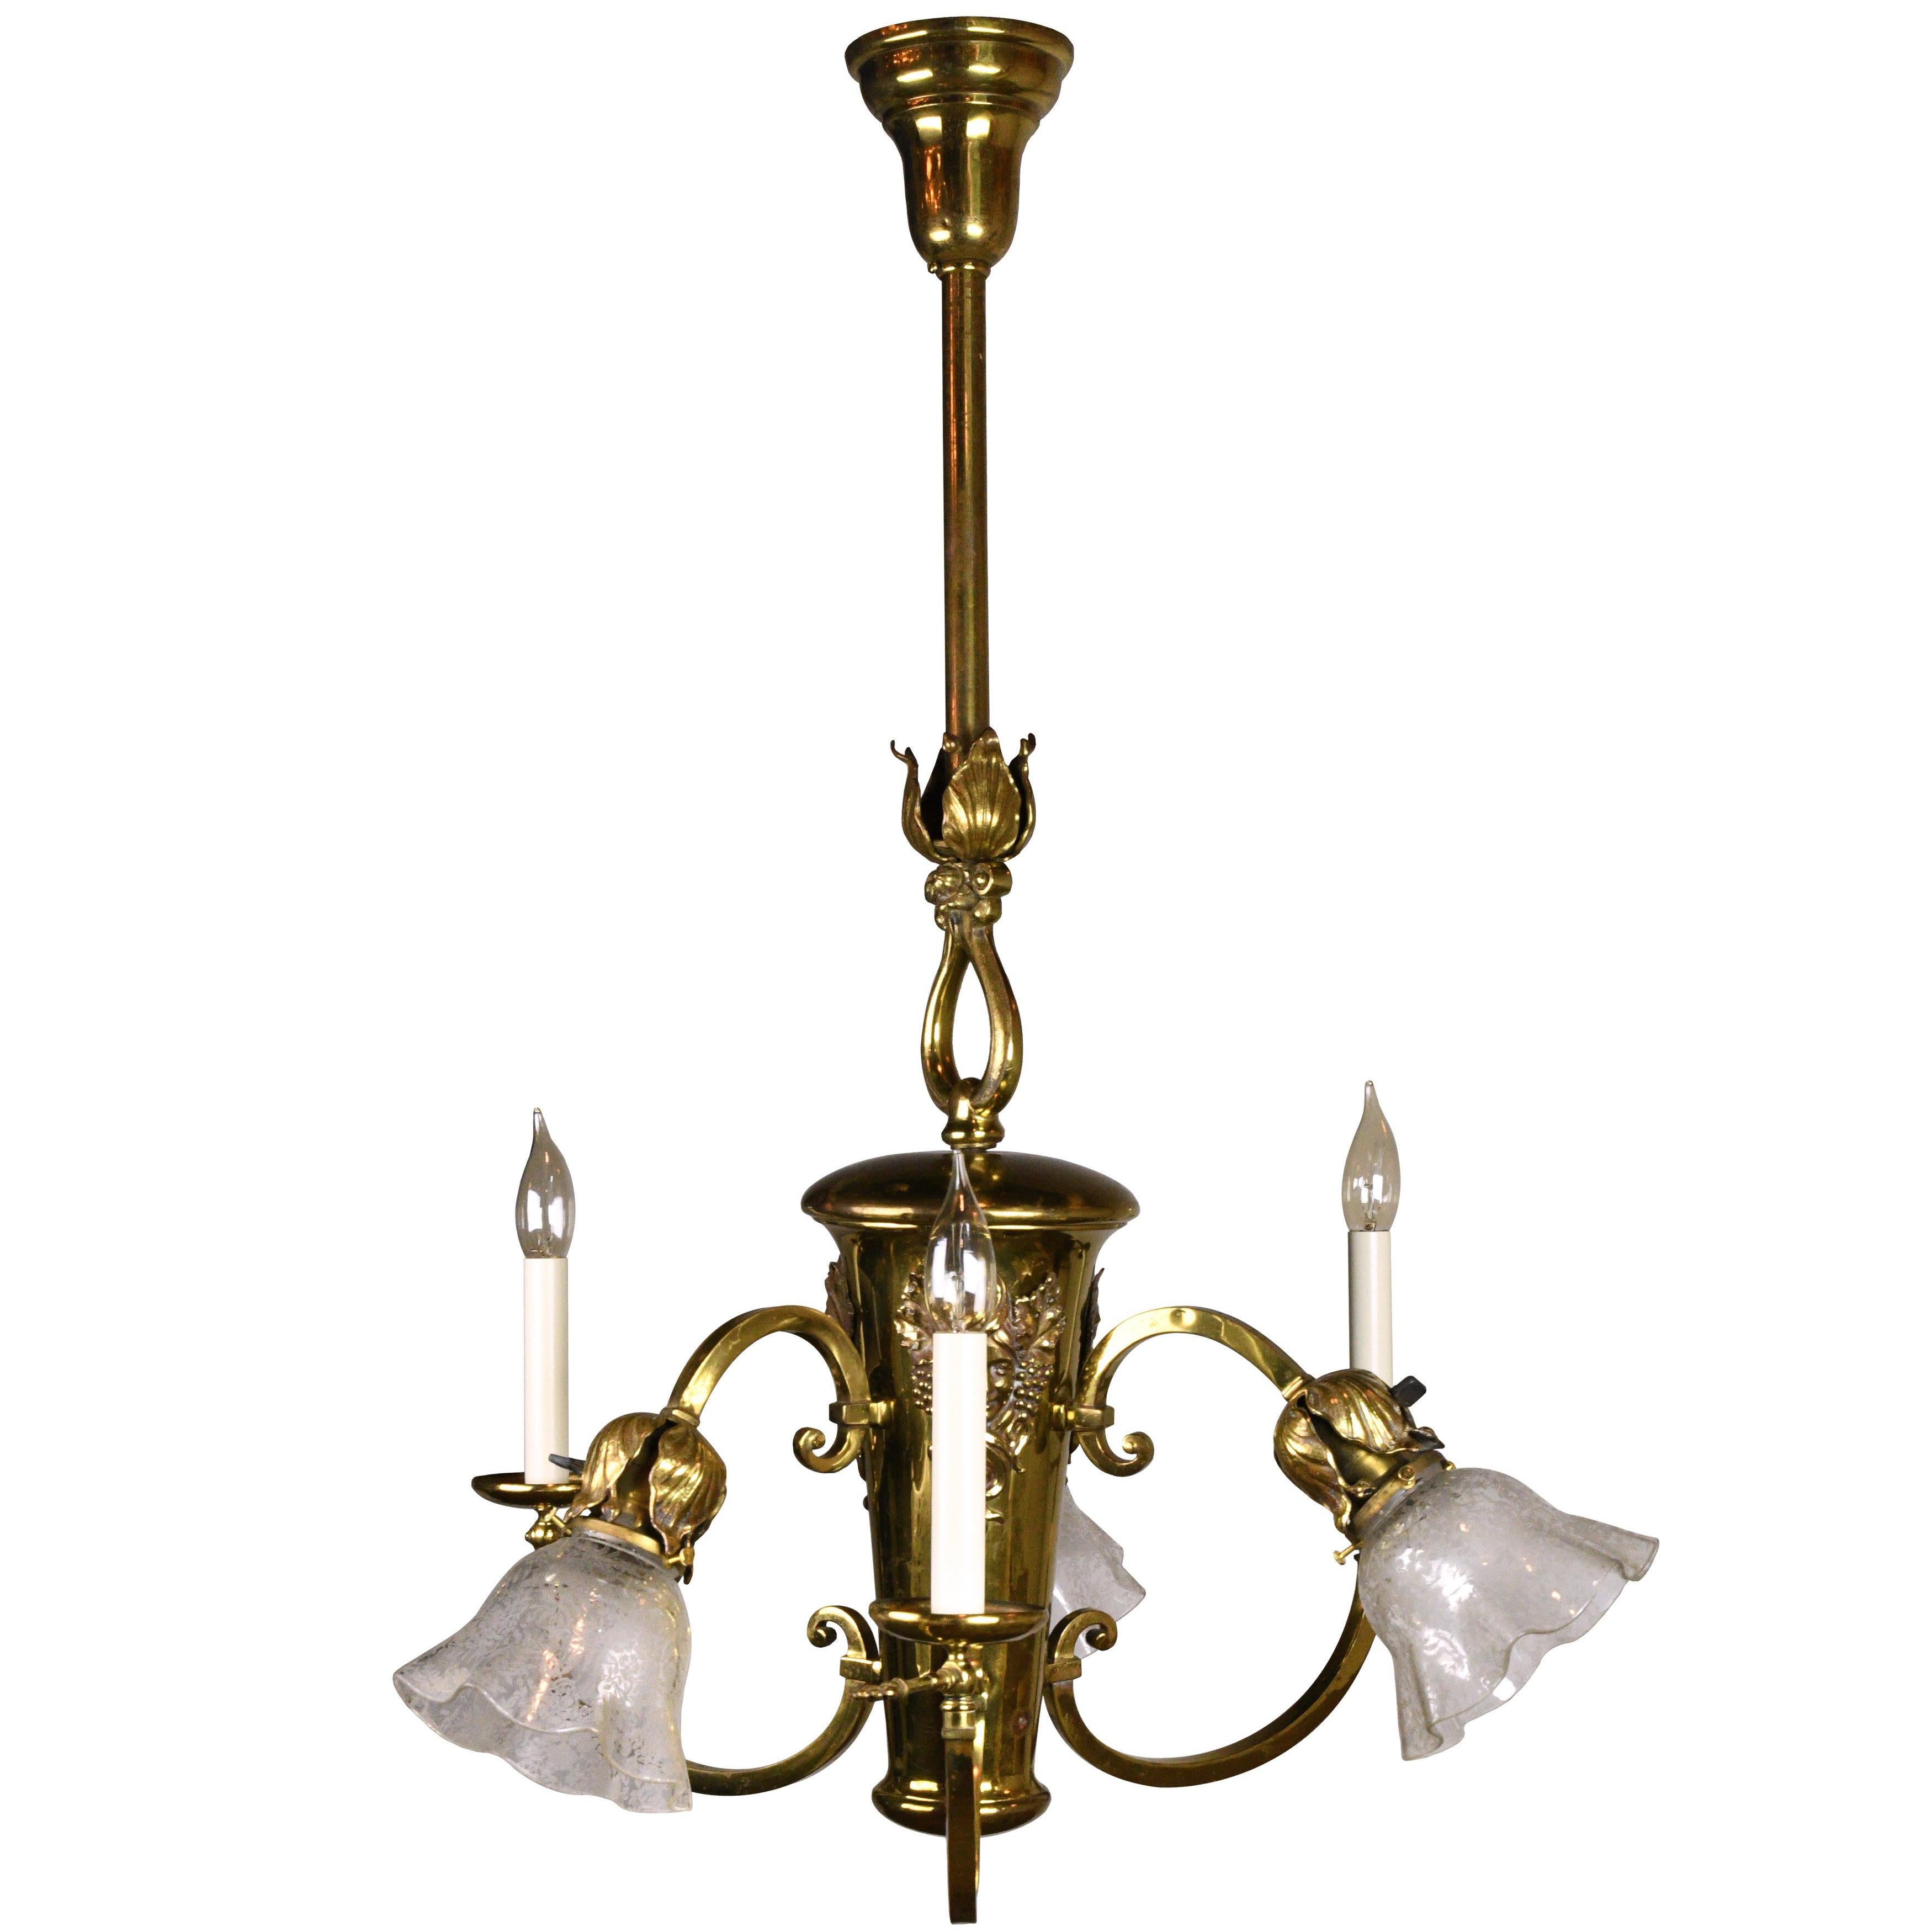 Six-Light Polished Brass Chandelier with Cameos